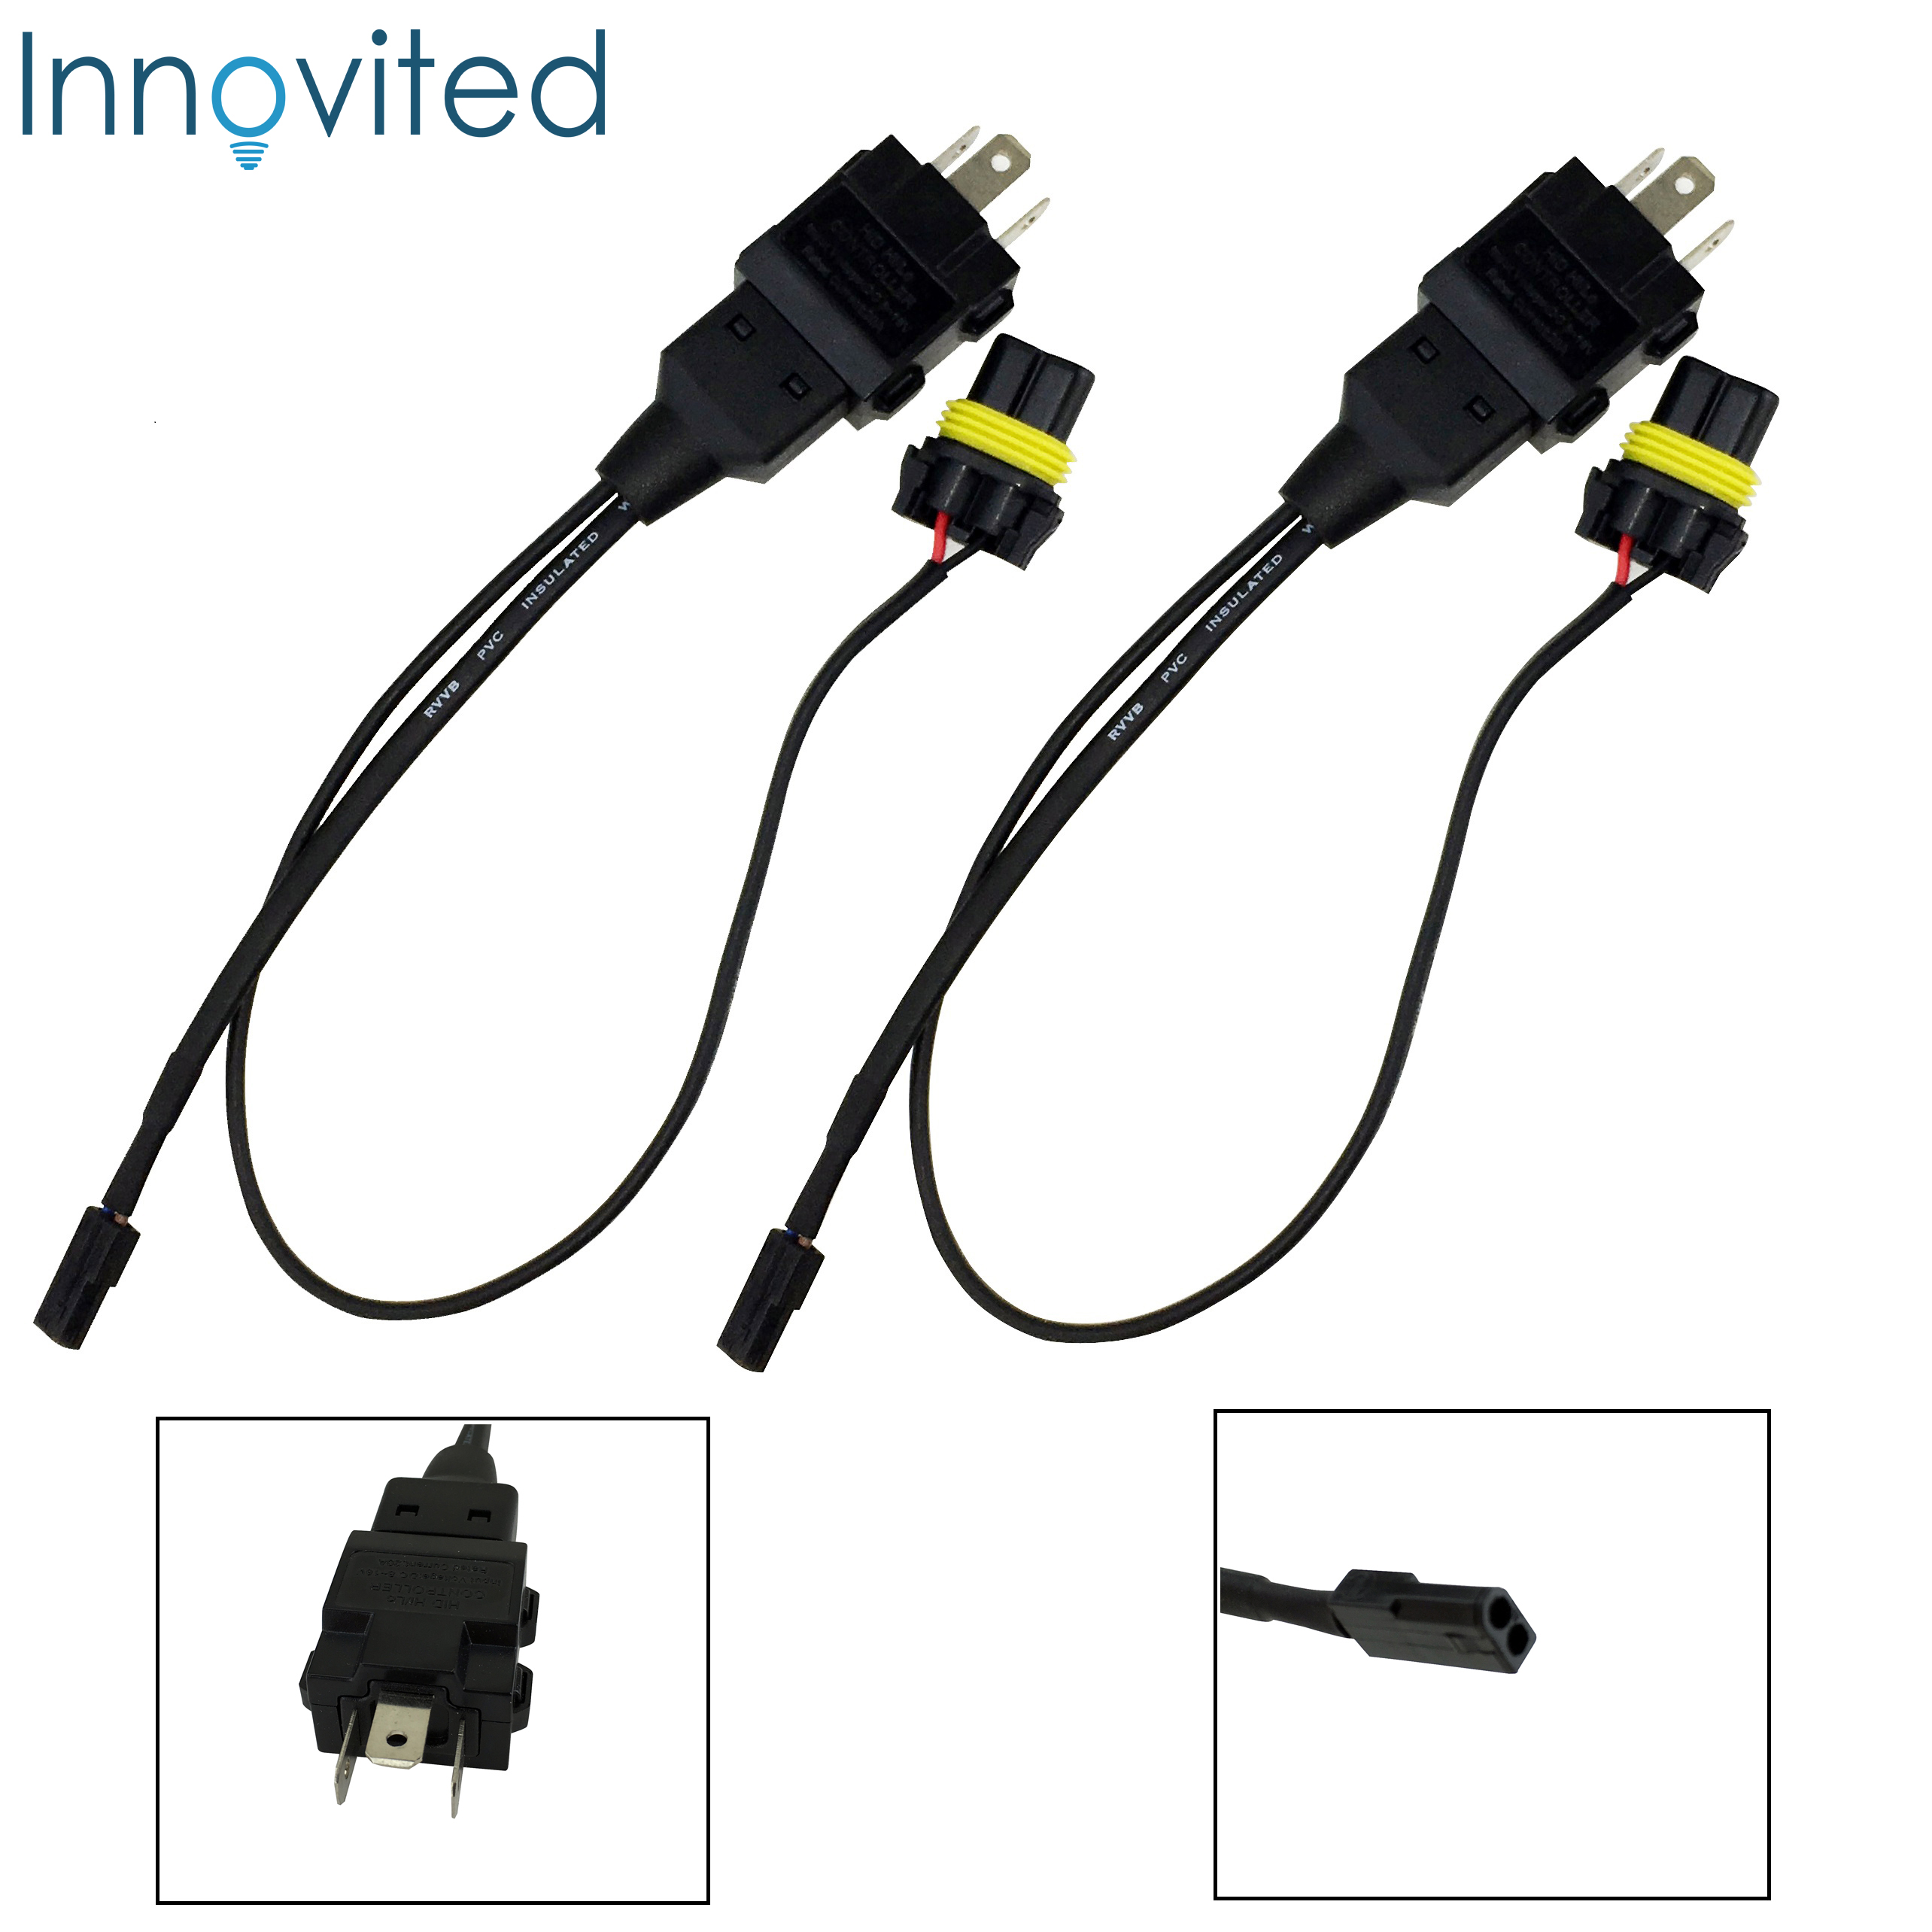 Easy Relay Harness For H4 9003 Hi//Lo Bi-Xenon HID Xenon Bulbs Wiring Controllers 2 Innovited